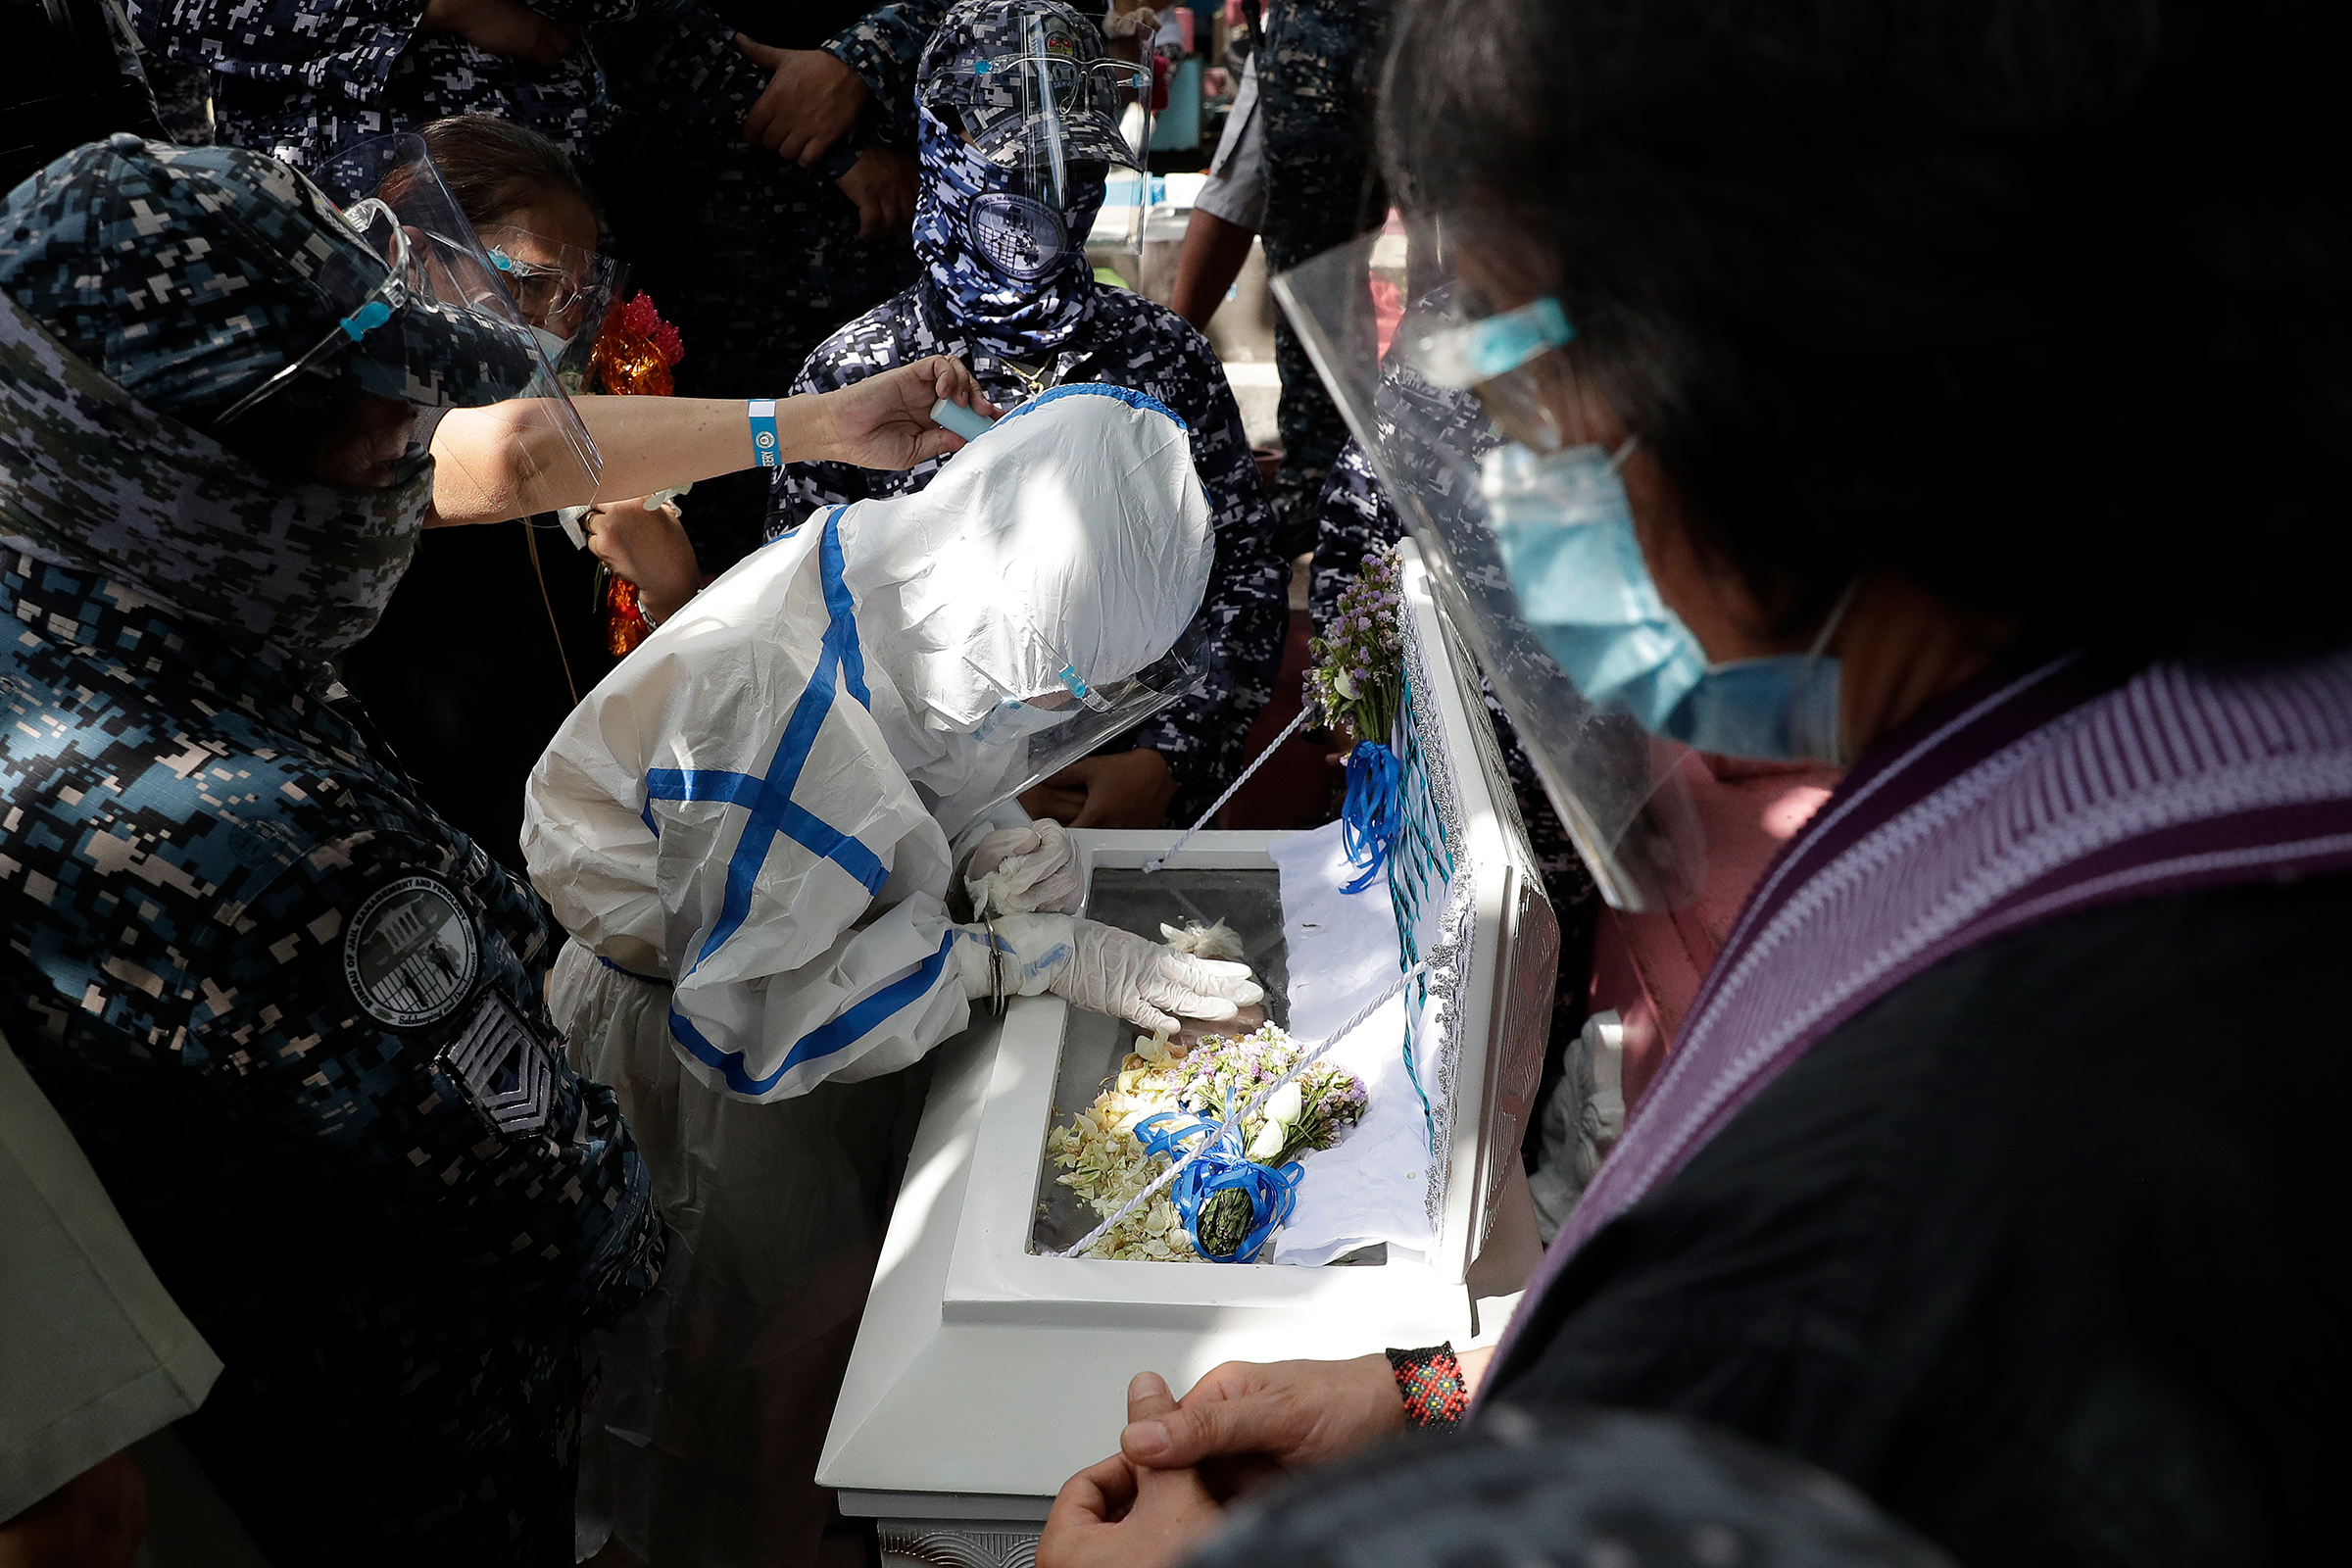 Detained left-wing activist Reina Mae Nasino, in handcuffs and wearing a protective suit to prevent the spread of coronavirus, touches the coffin of her three-month-old daughter, River, during funeral rites guarded by armed escorts at Manila North Cemetery on Oct. 16. The 23-year-old was among three activists arrested last year in a Philippine left-wing group’s office, the Associated Press reports, and charged with the illegal possession of explosives and firearms; their lawyers allege that the weapons were placed by police, which denied the accusation. A court allowed Nasino three hours to attend the burial of her baby, who died of acute gastroenteritis, the AP adds, but critics decried her treatment.